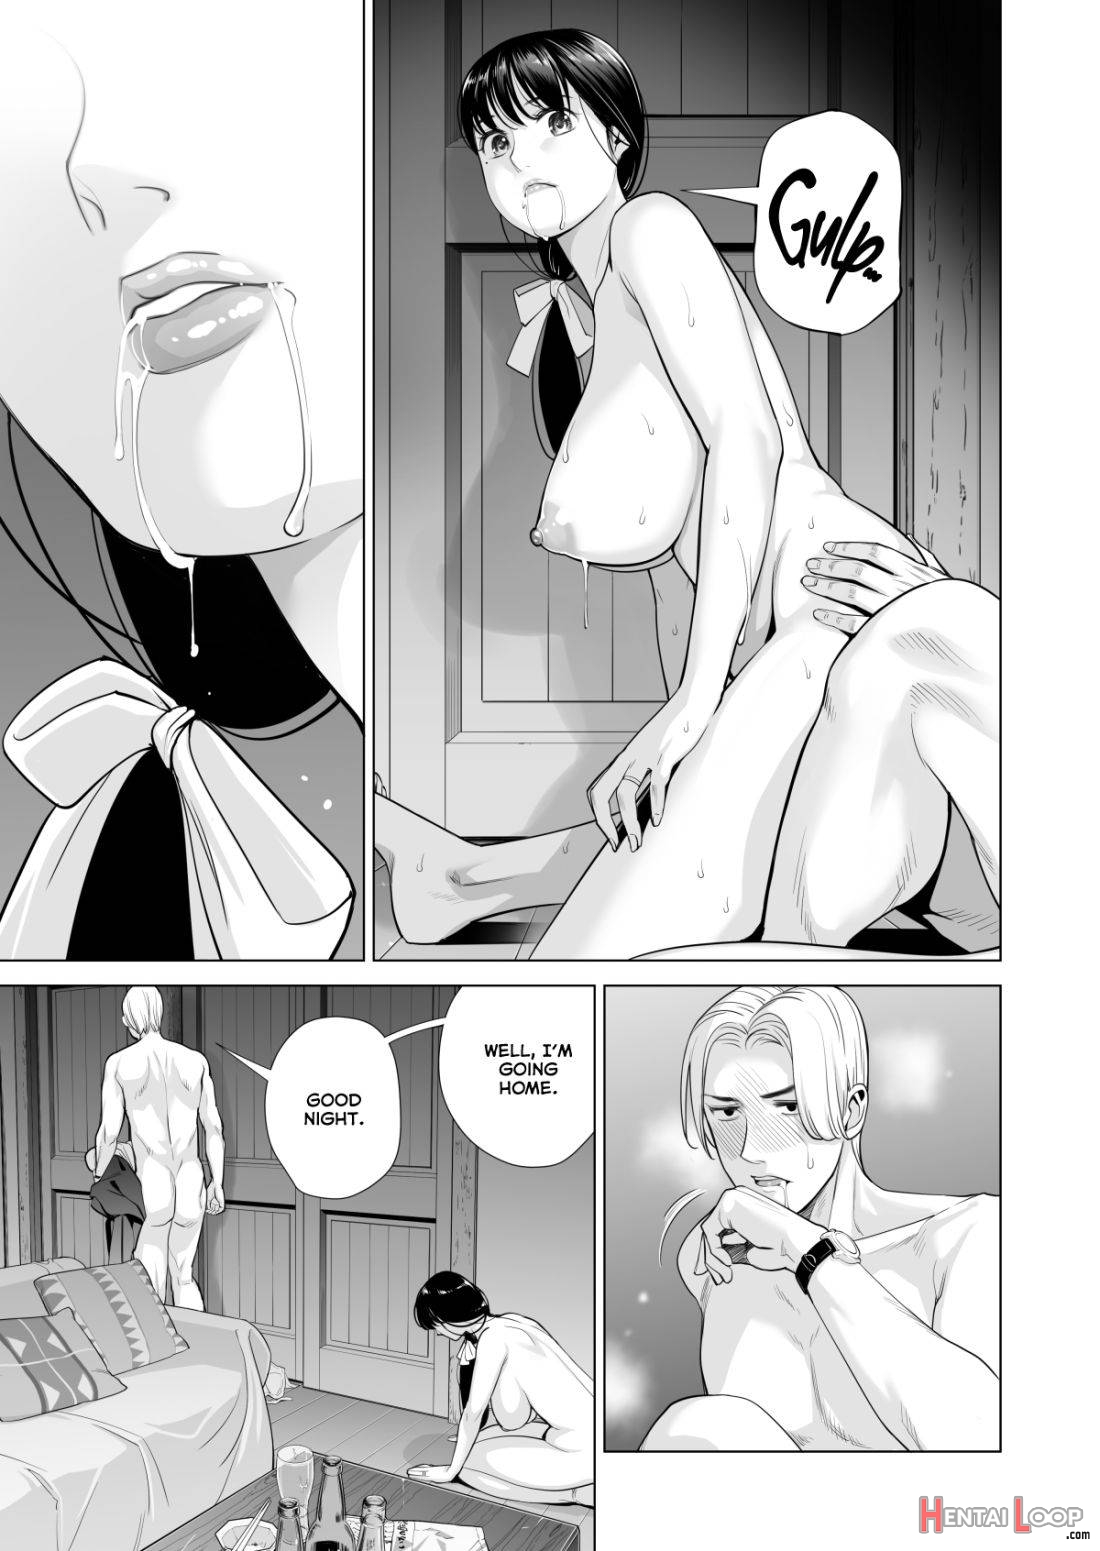 Tsukiyo no Midare Zake (Zenpen) Moonlit Intoxication ~ A Housewife Stolen by a Coworker Besides her Blackout Drunk Husband ~ Chapter 1 page 59